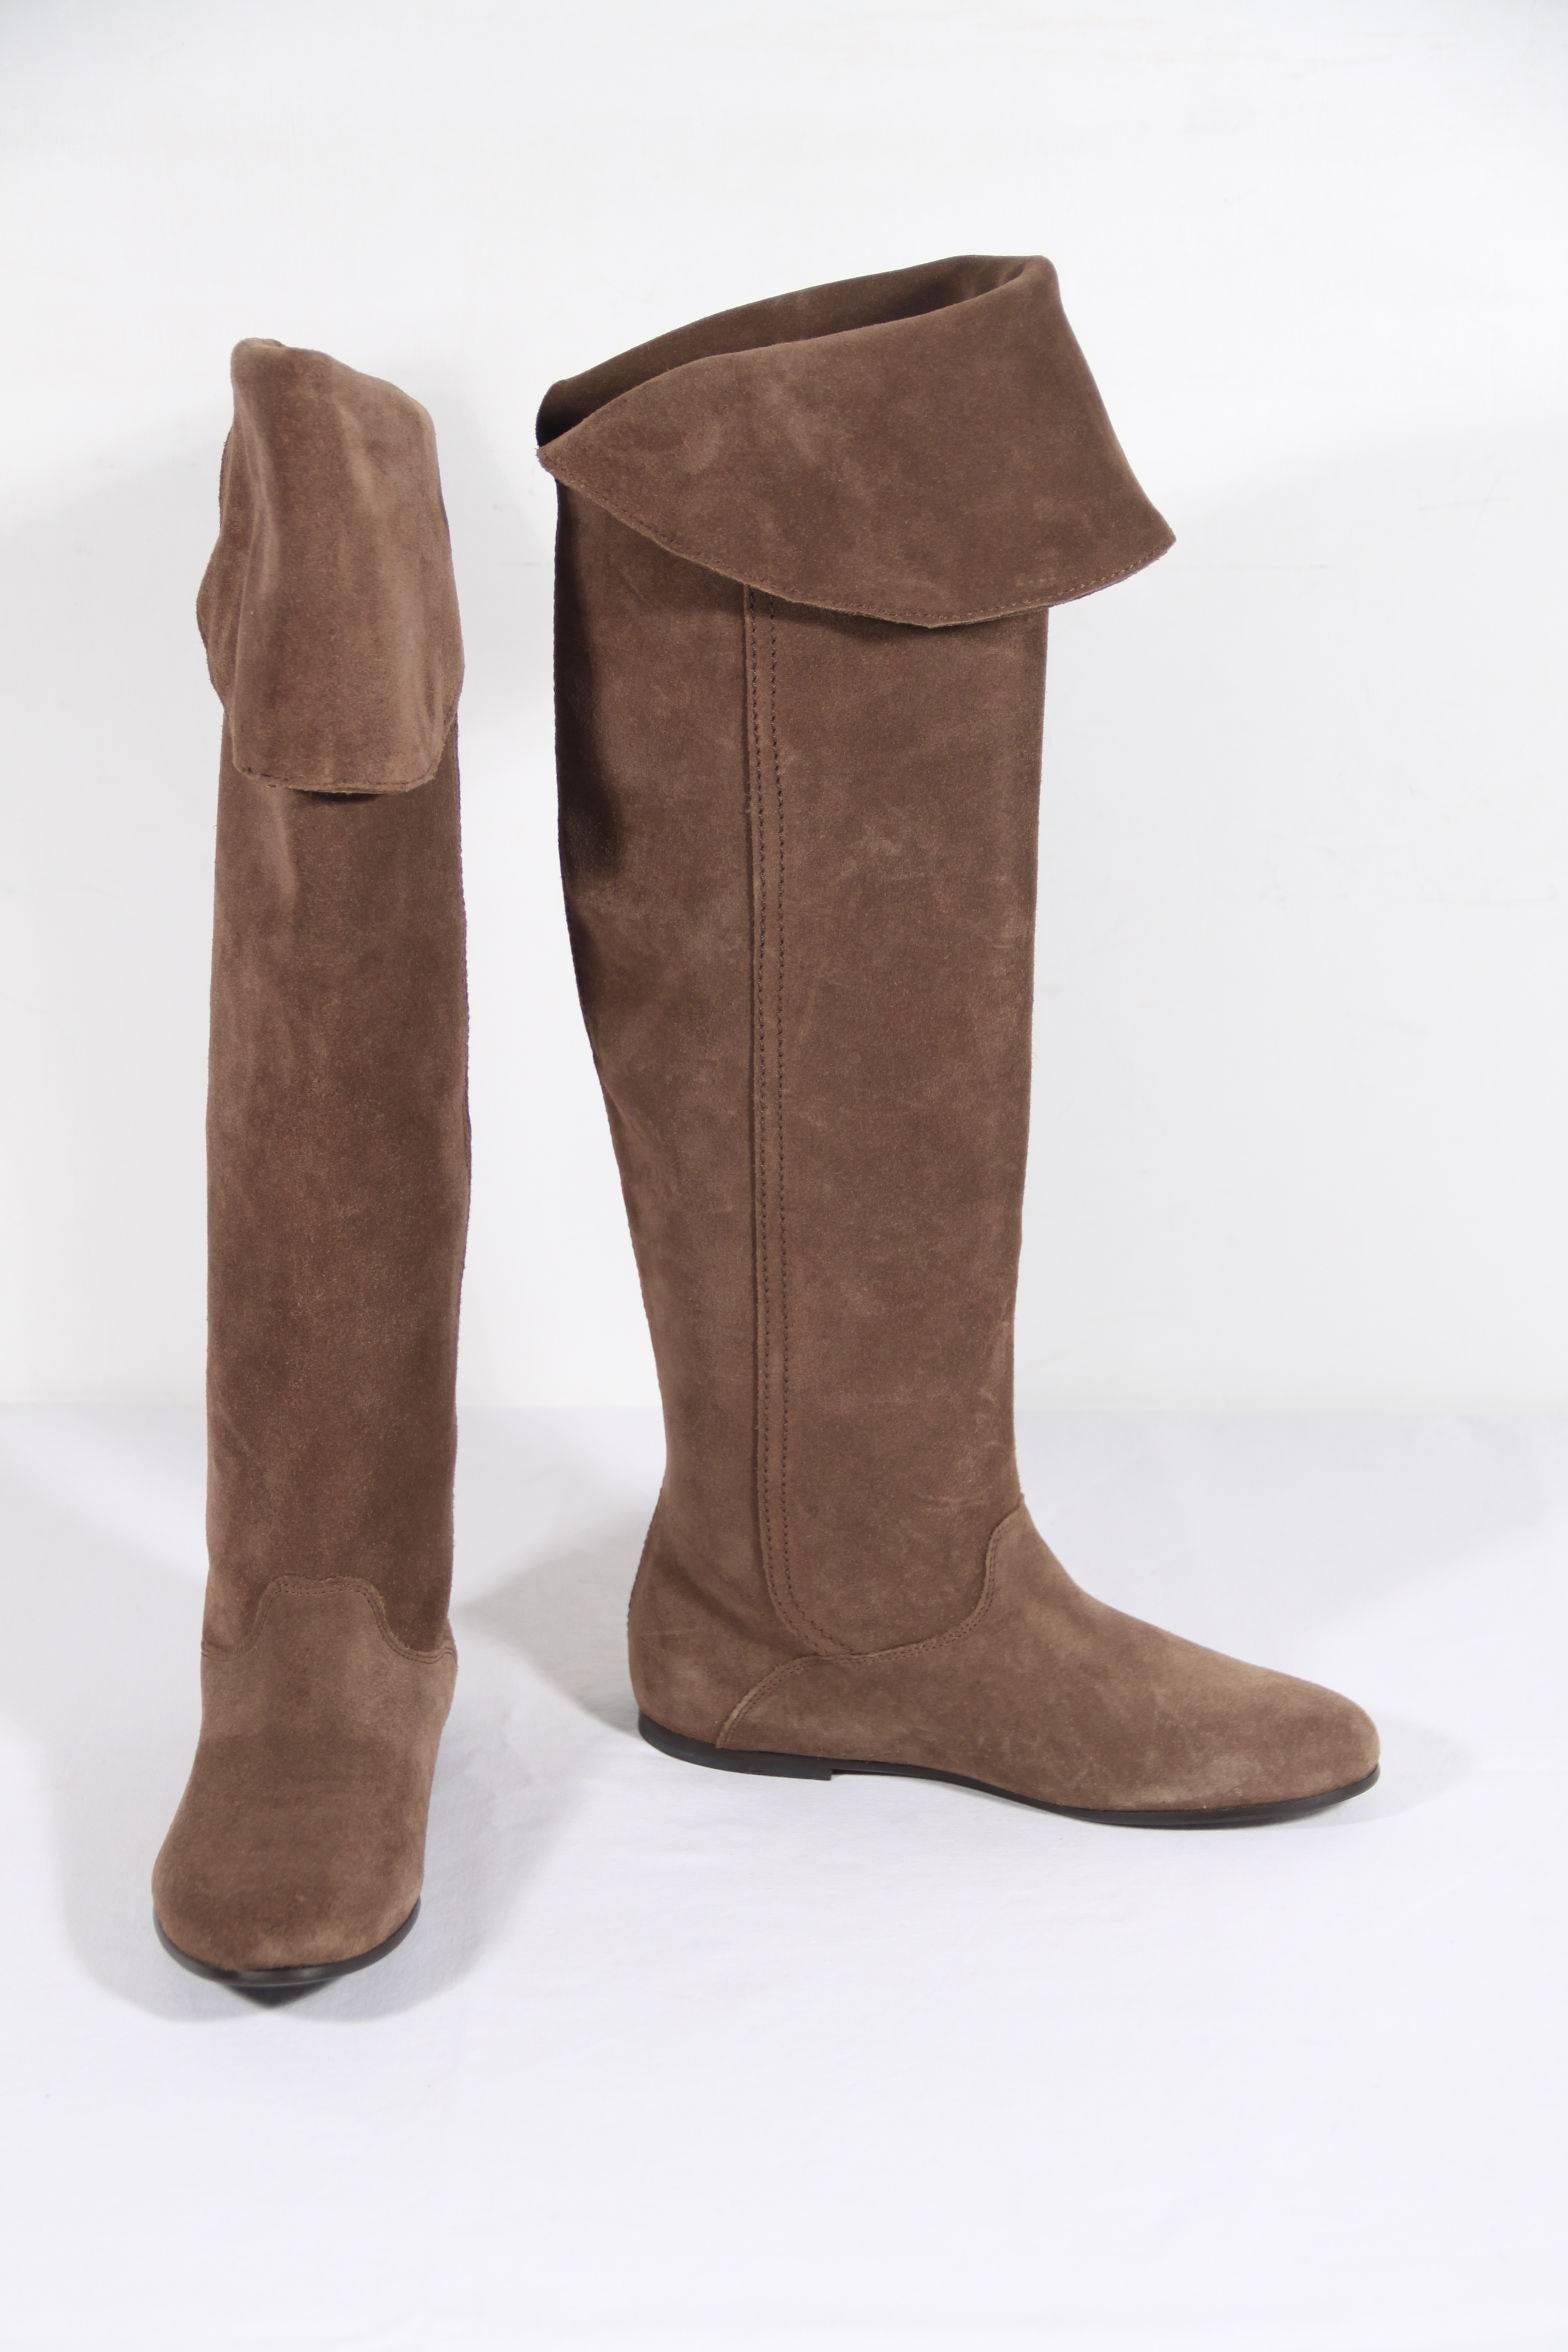 Brand: WEEKEND by MAX MARA Made in Italy

Condition (please read our condition chart below): UNWORN: An item which comes from a sample collection. Used maybe once for a fashion show.

Further comments: 100% leather upper - Knee-high design (can